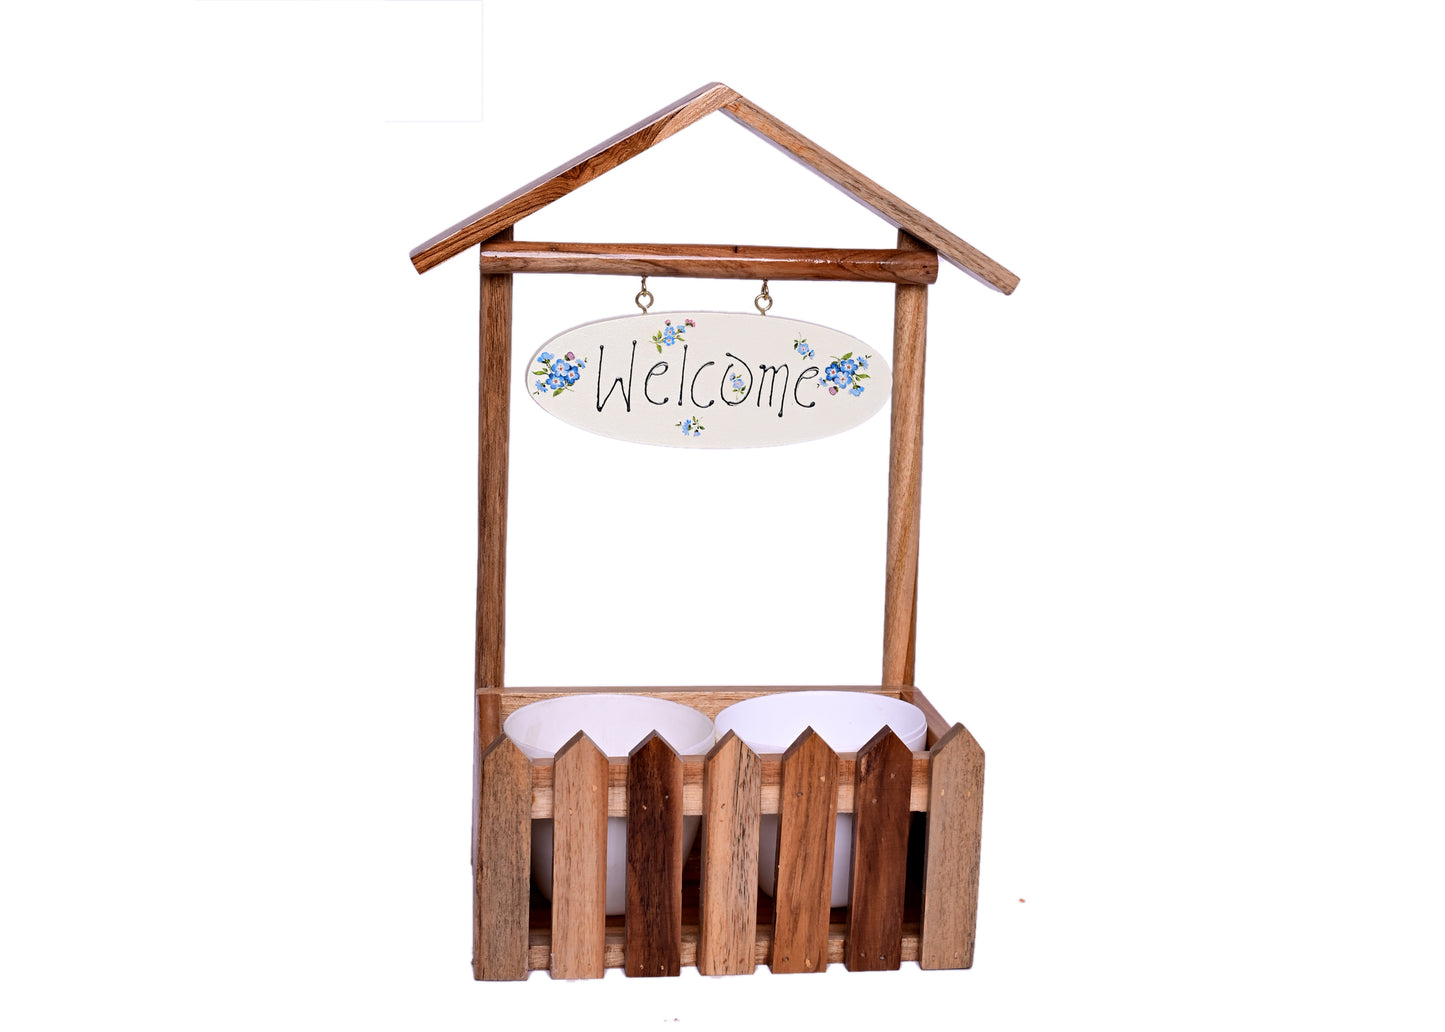 The Weaver's Nest Wooden Welcome Decorative Fence Planter for Indoor, Home Decor, Entrance, Living Room, Garden, Balcony (Brown, 30 X 16 X 40 cm)